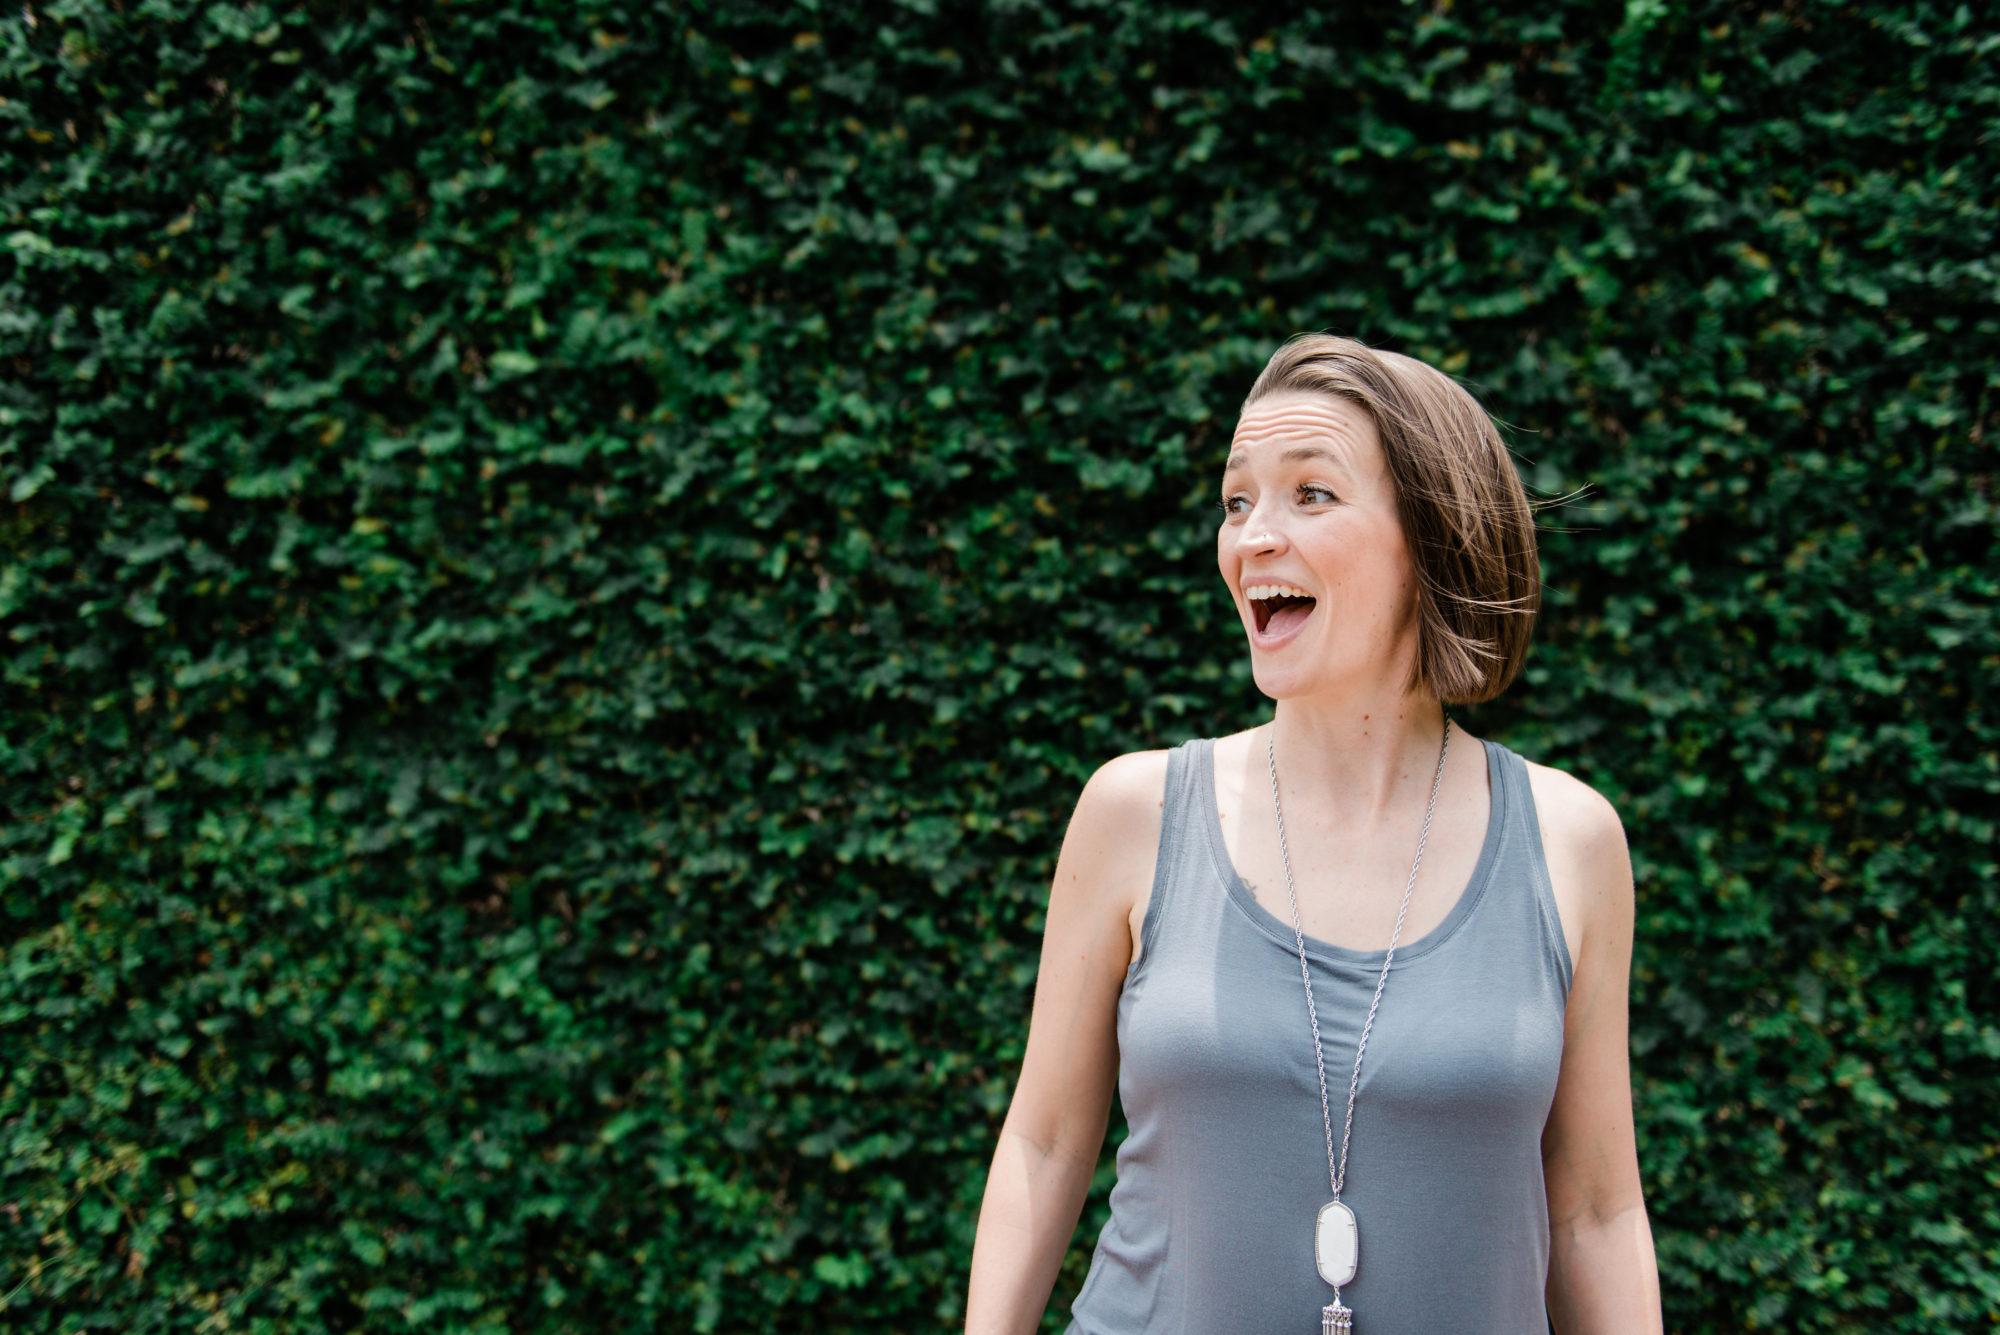 Tara excited wearing a gray tank top with a backdrop of deep green leaves